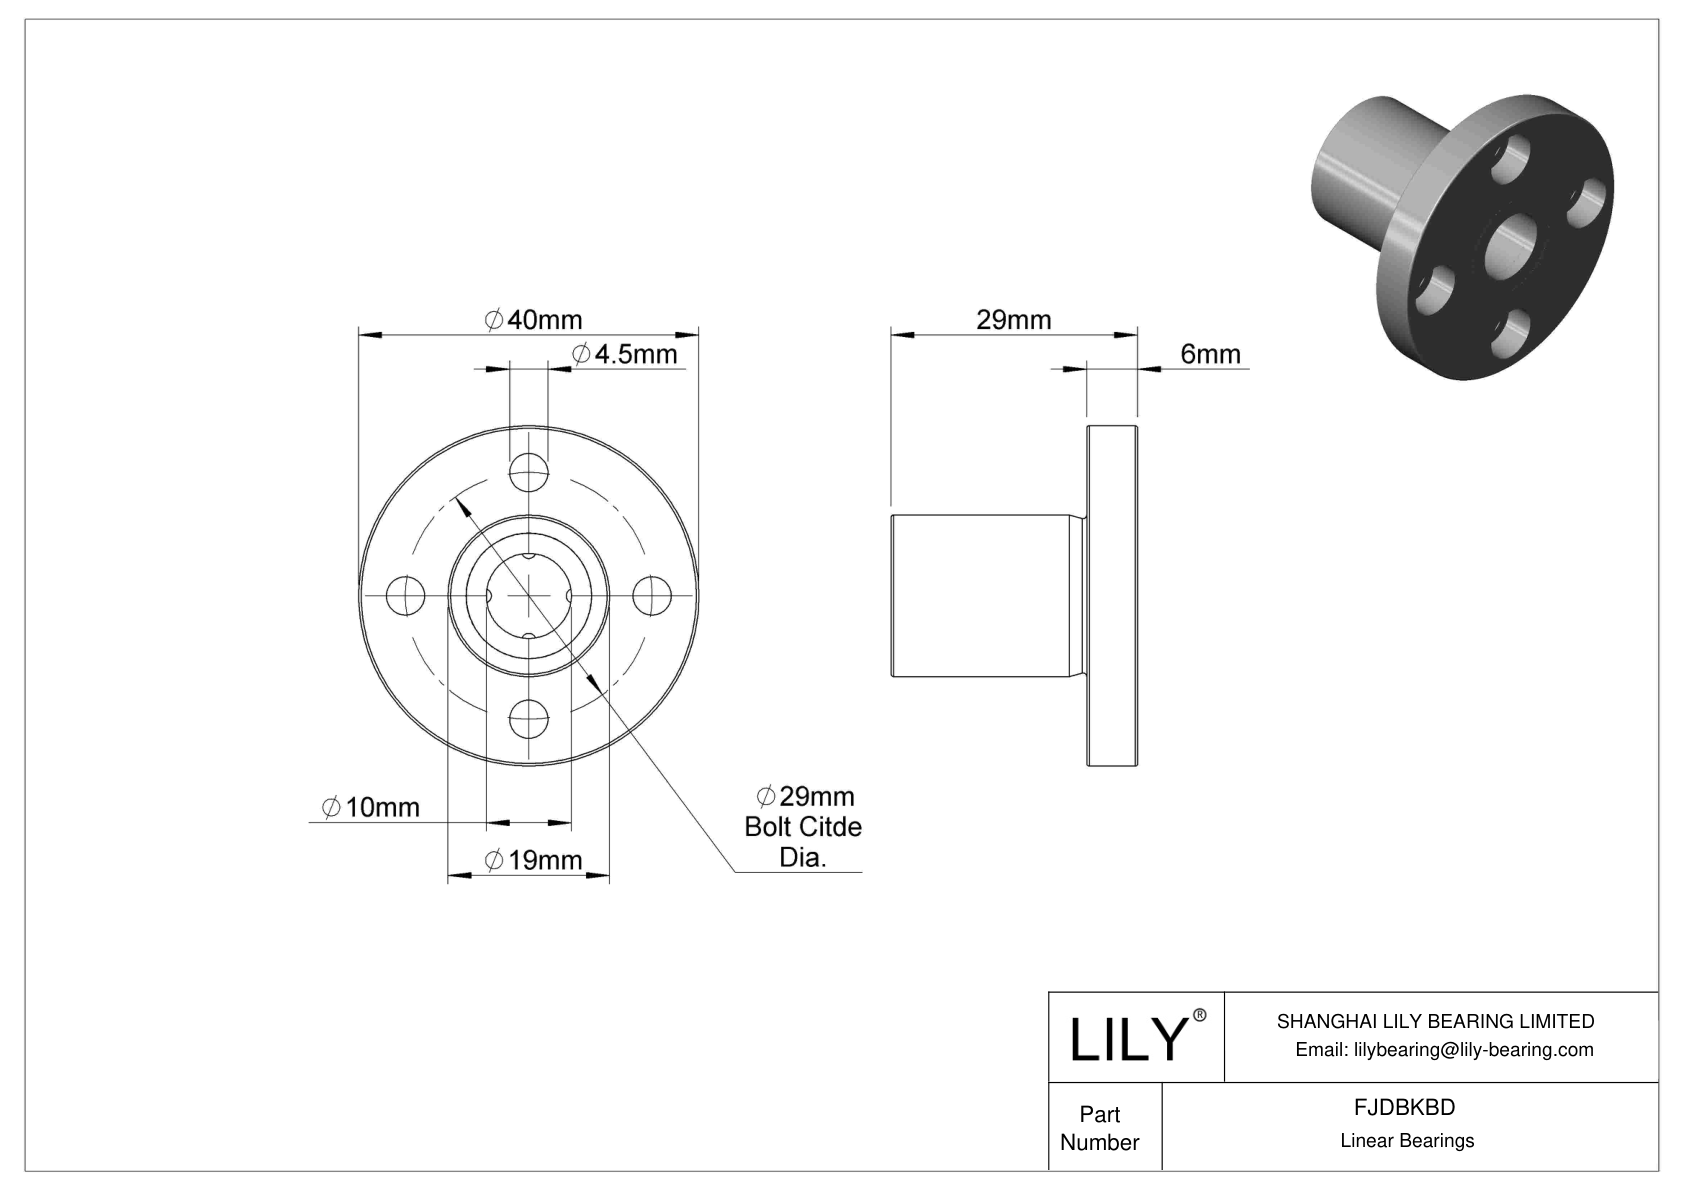 FJDBKBD Corrosion-Resistant Flange-Mounted Linear Ball Bearings cad drawing